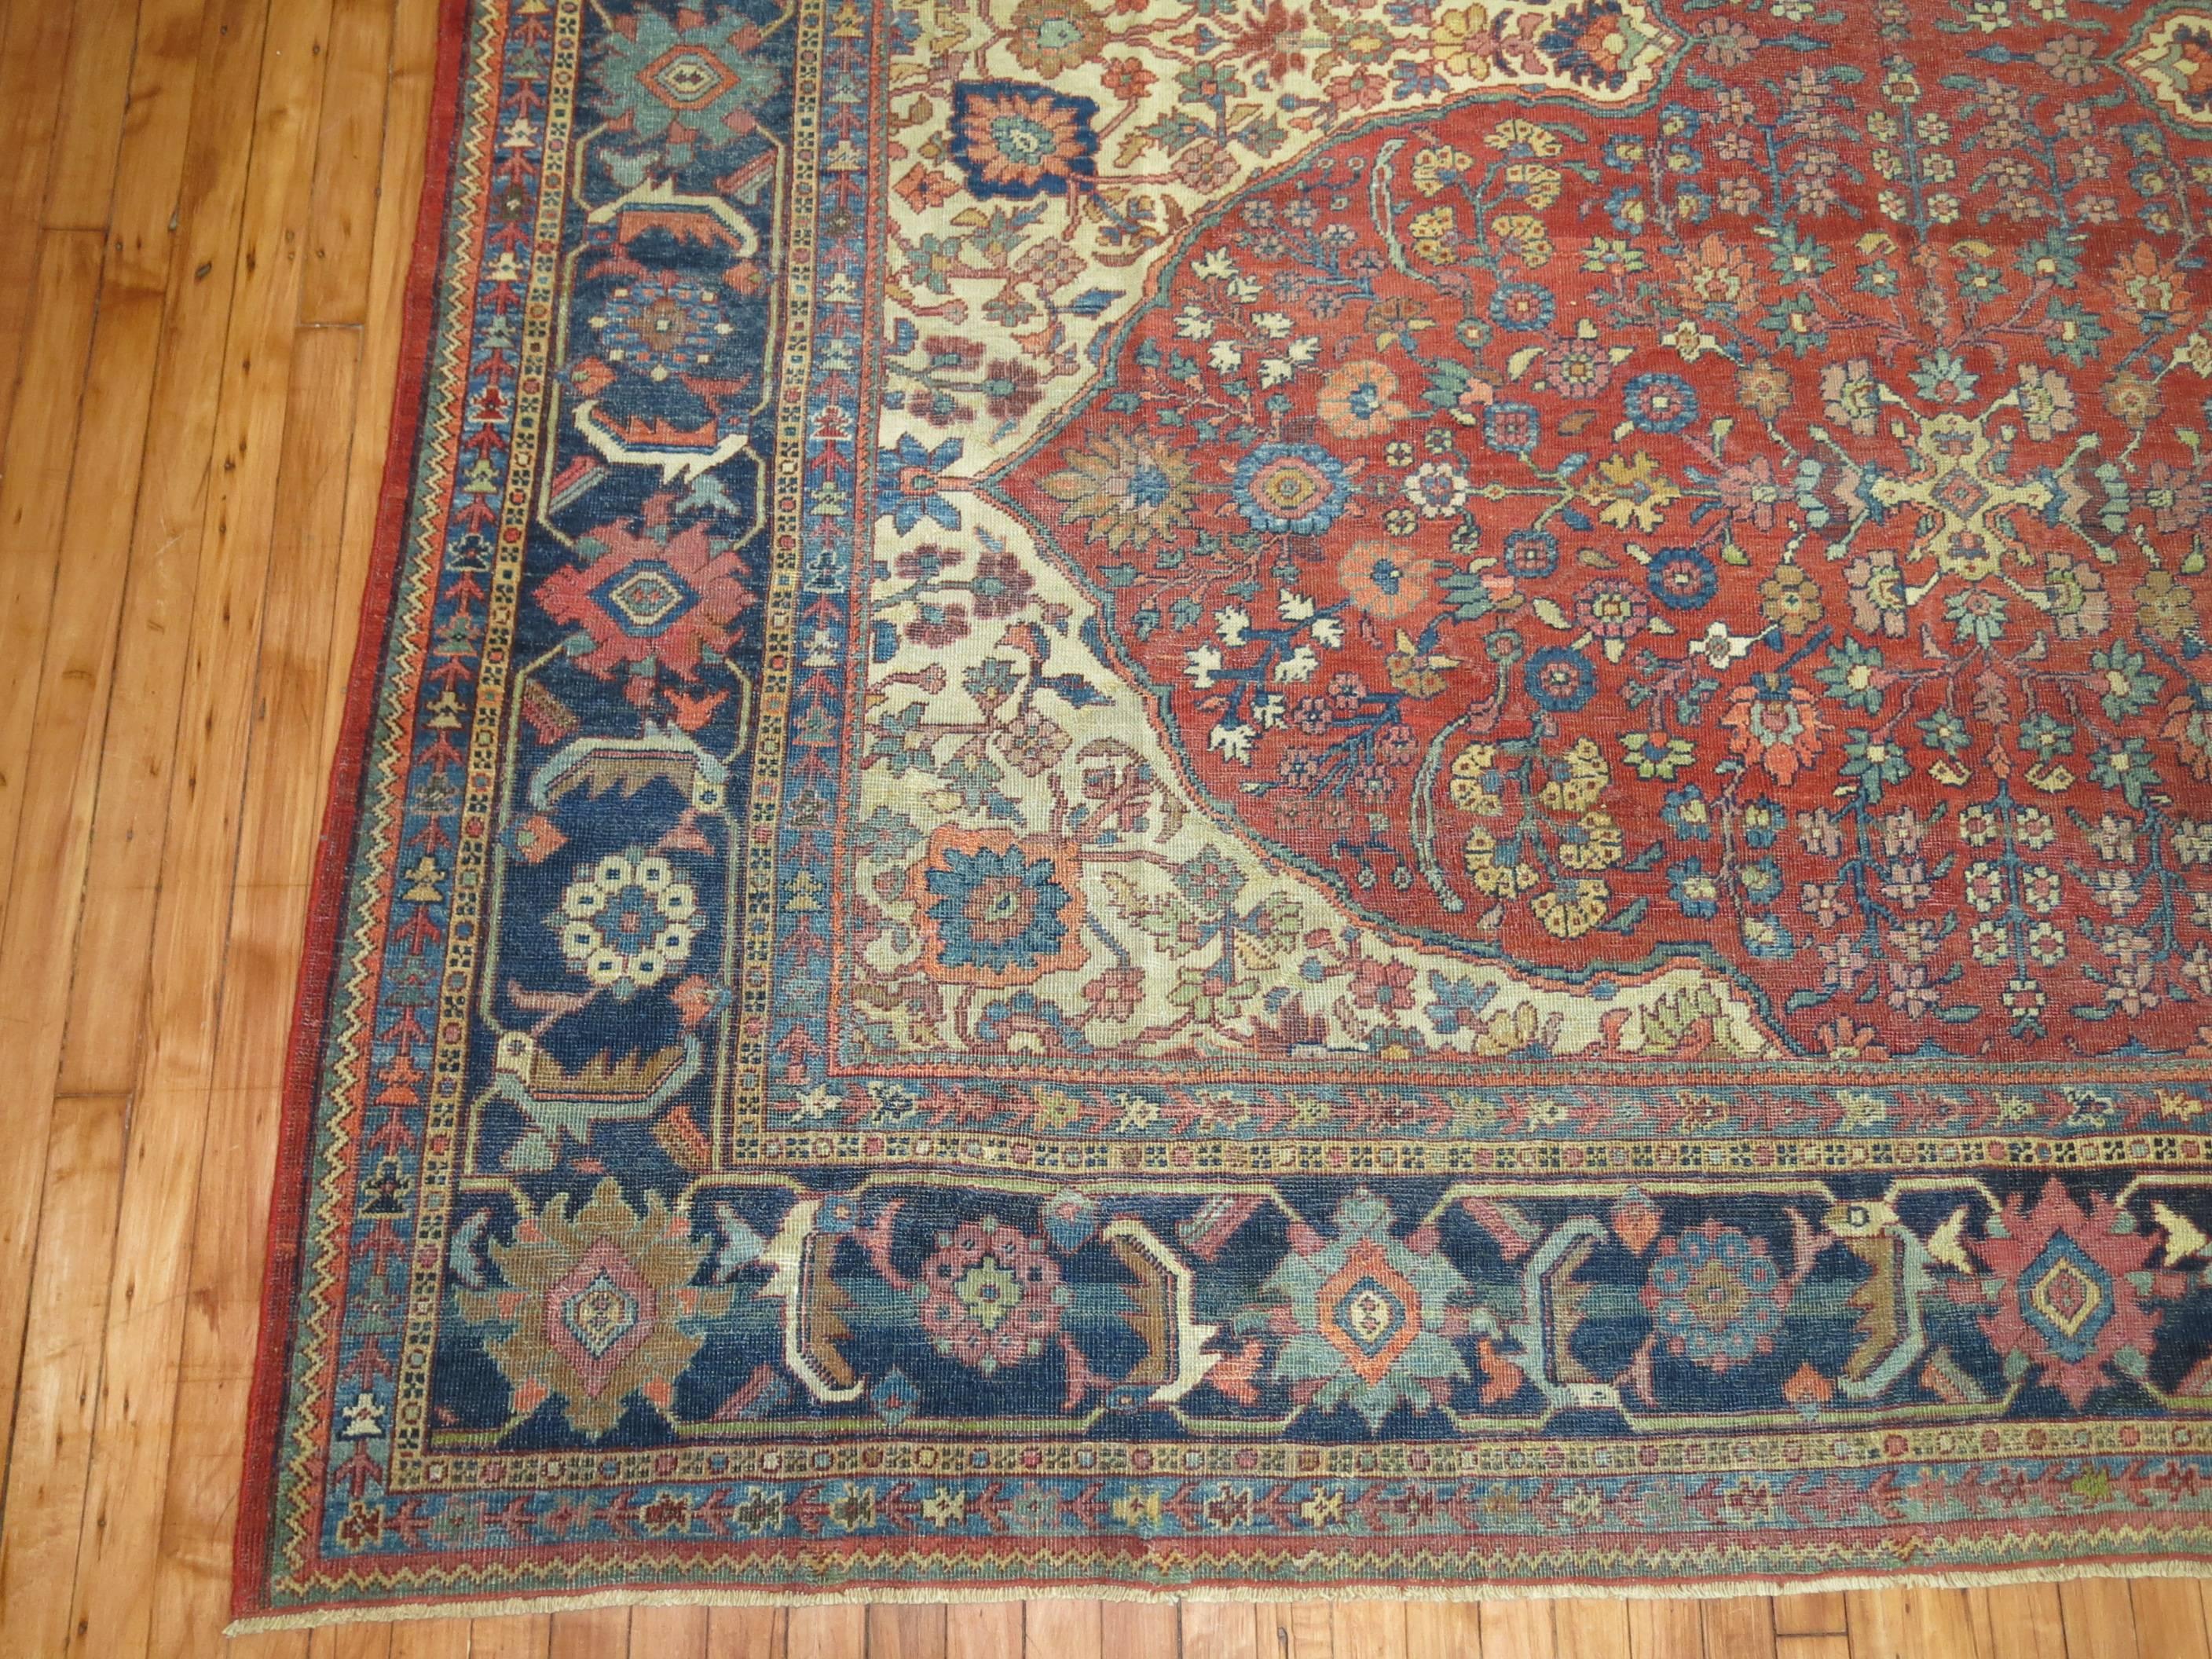 An early 20th century Persian Mahal rug with an obscure motif in reds and navy blues.

9'3'' x 12'6''